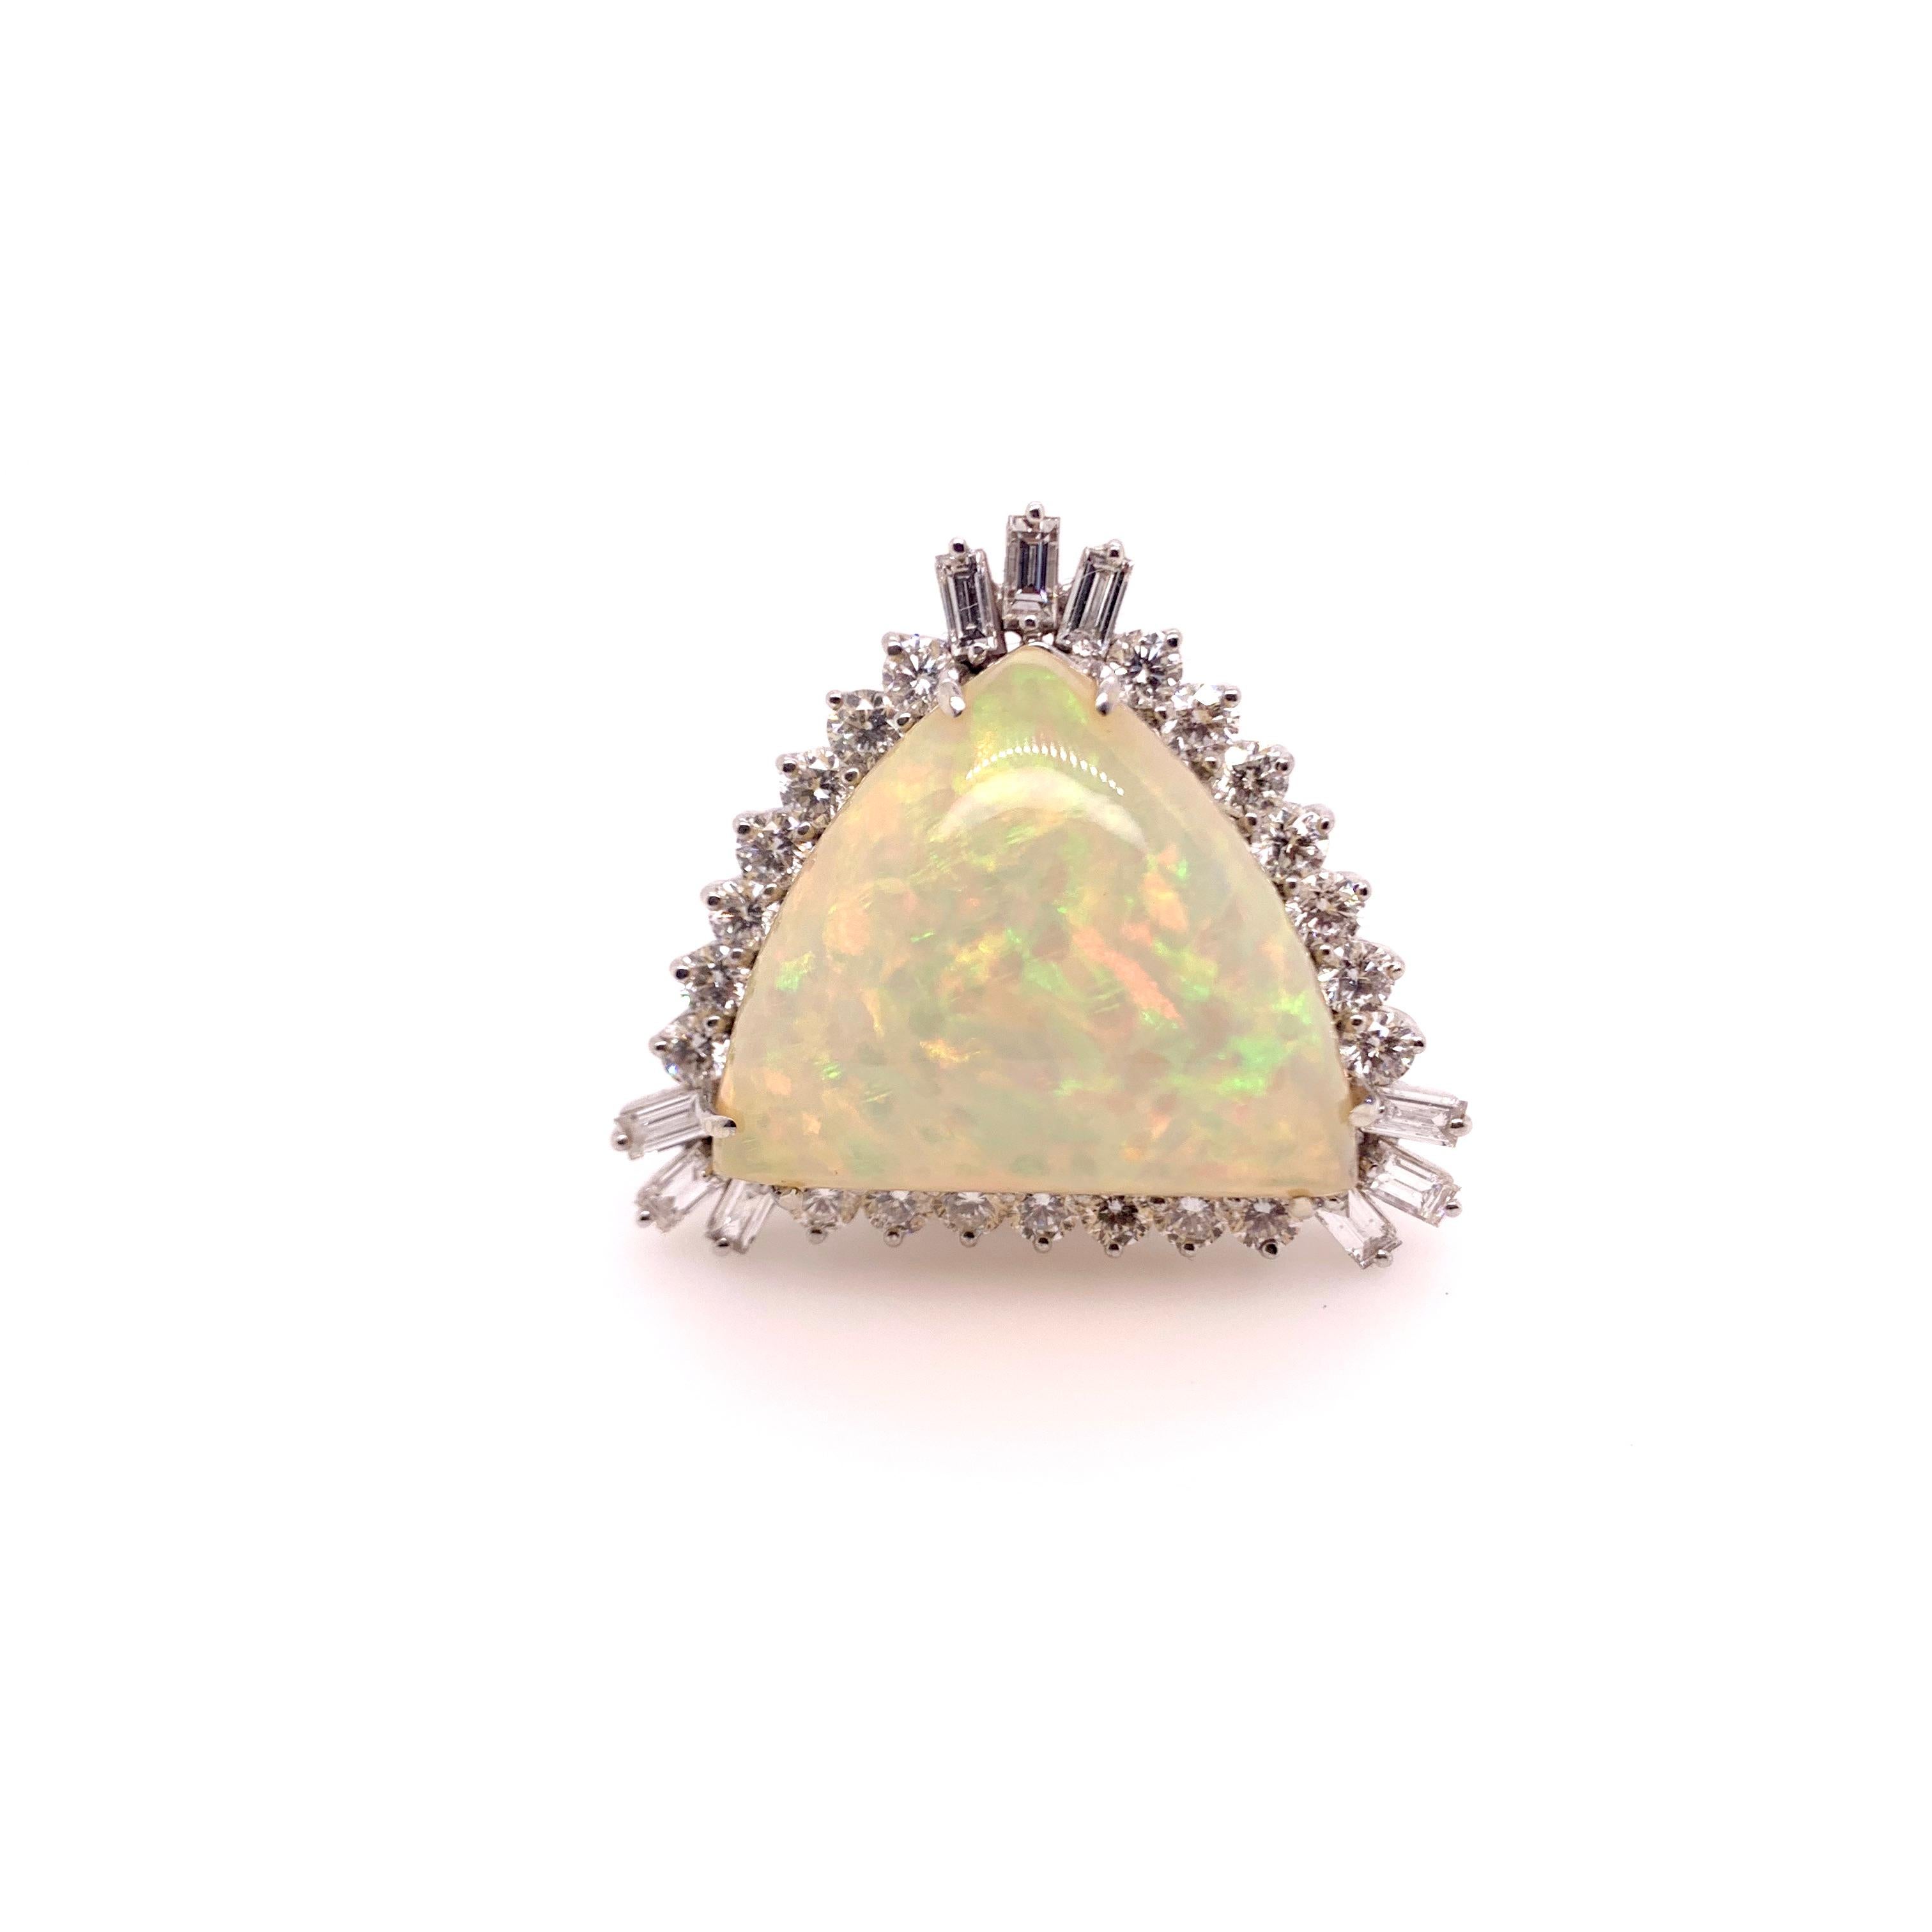 This impressive Ethiopian Opal will sit boldly on your hand with it's massive size and custom made diamond setting.  The trillion shaped opal has enormous colortones and the round brilliant and baguette diamonds accentuate the opal.   The large